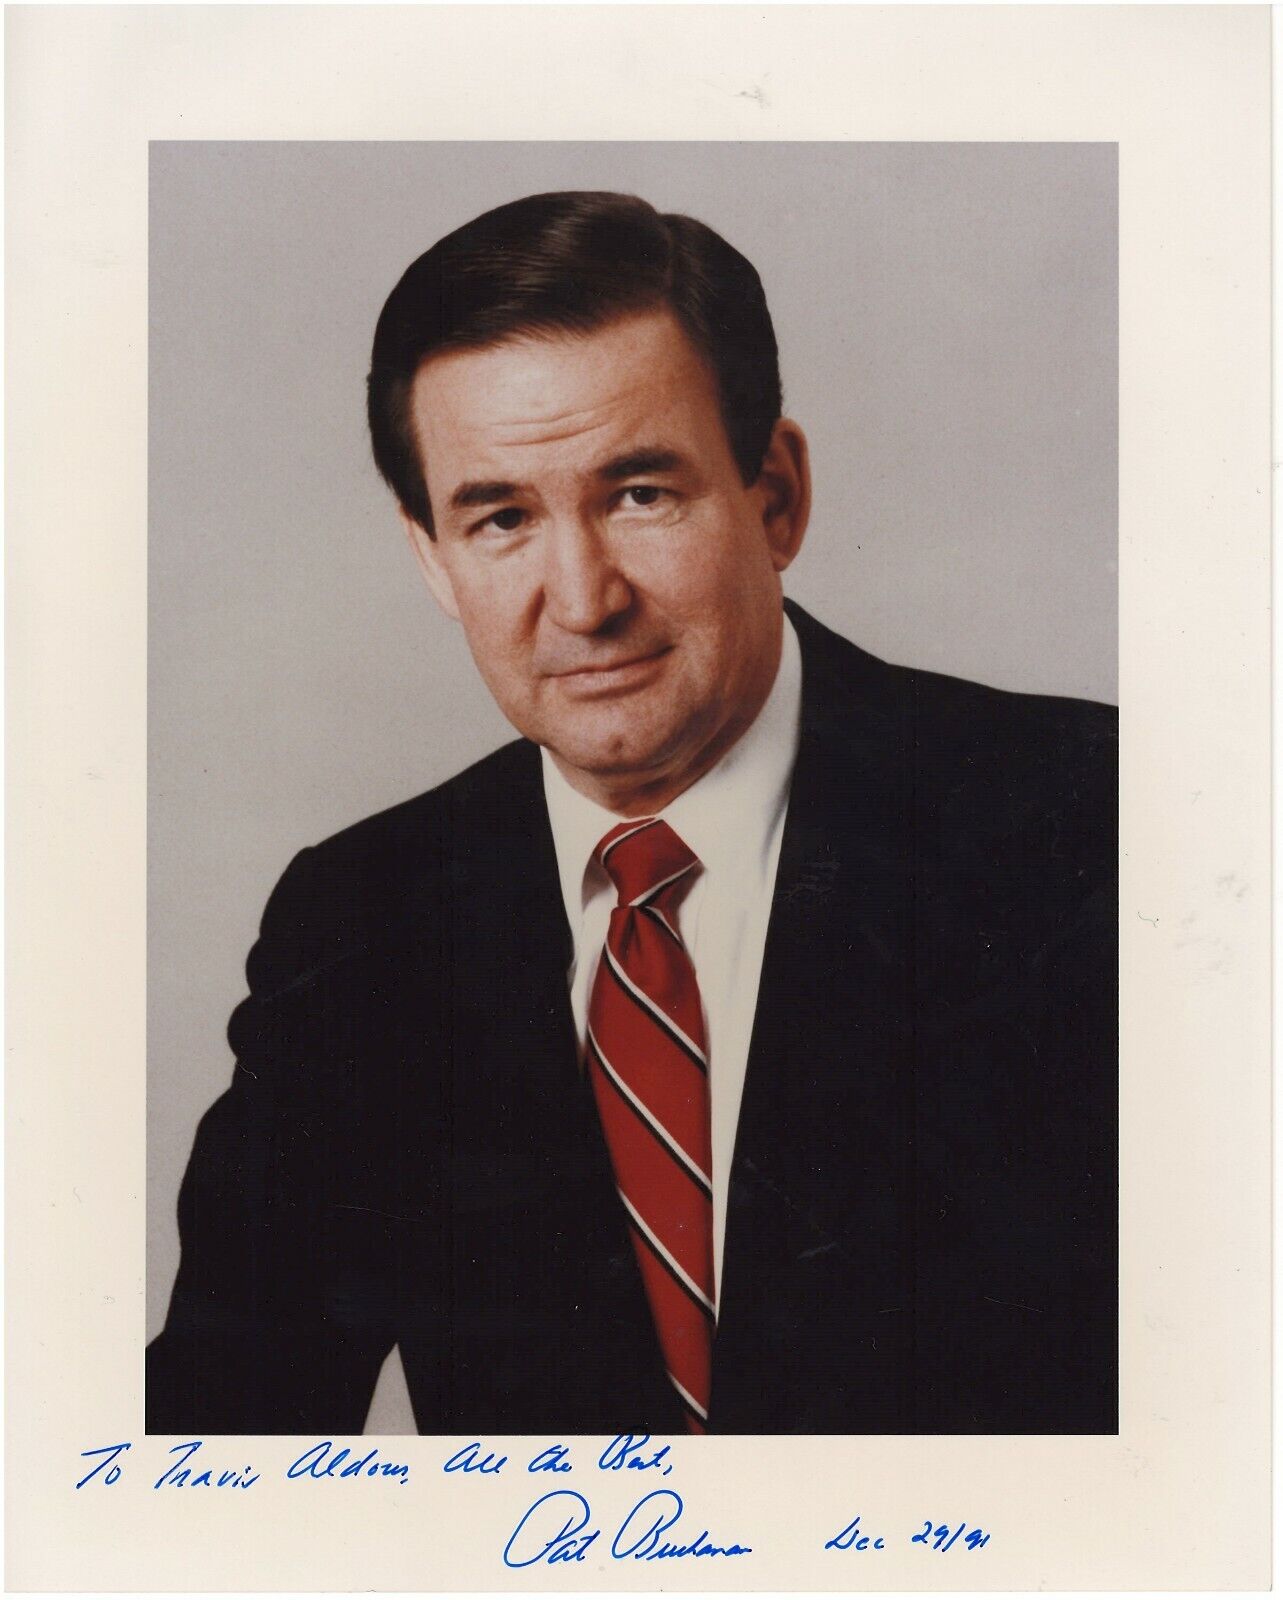 PAT BUCHANAN FORMER WHITE HOUSE AIDE & CONSERVATIVE TV HOST RARE SIGNED Photo Poster painting